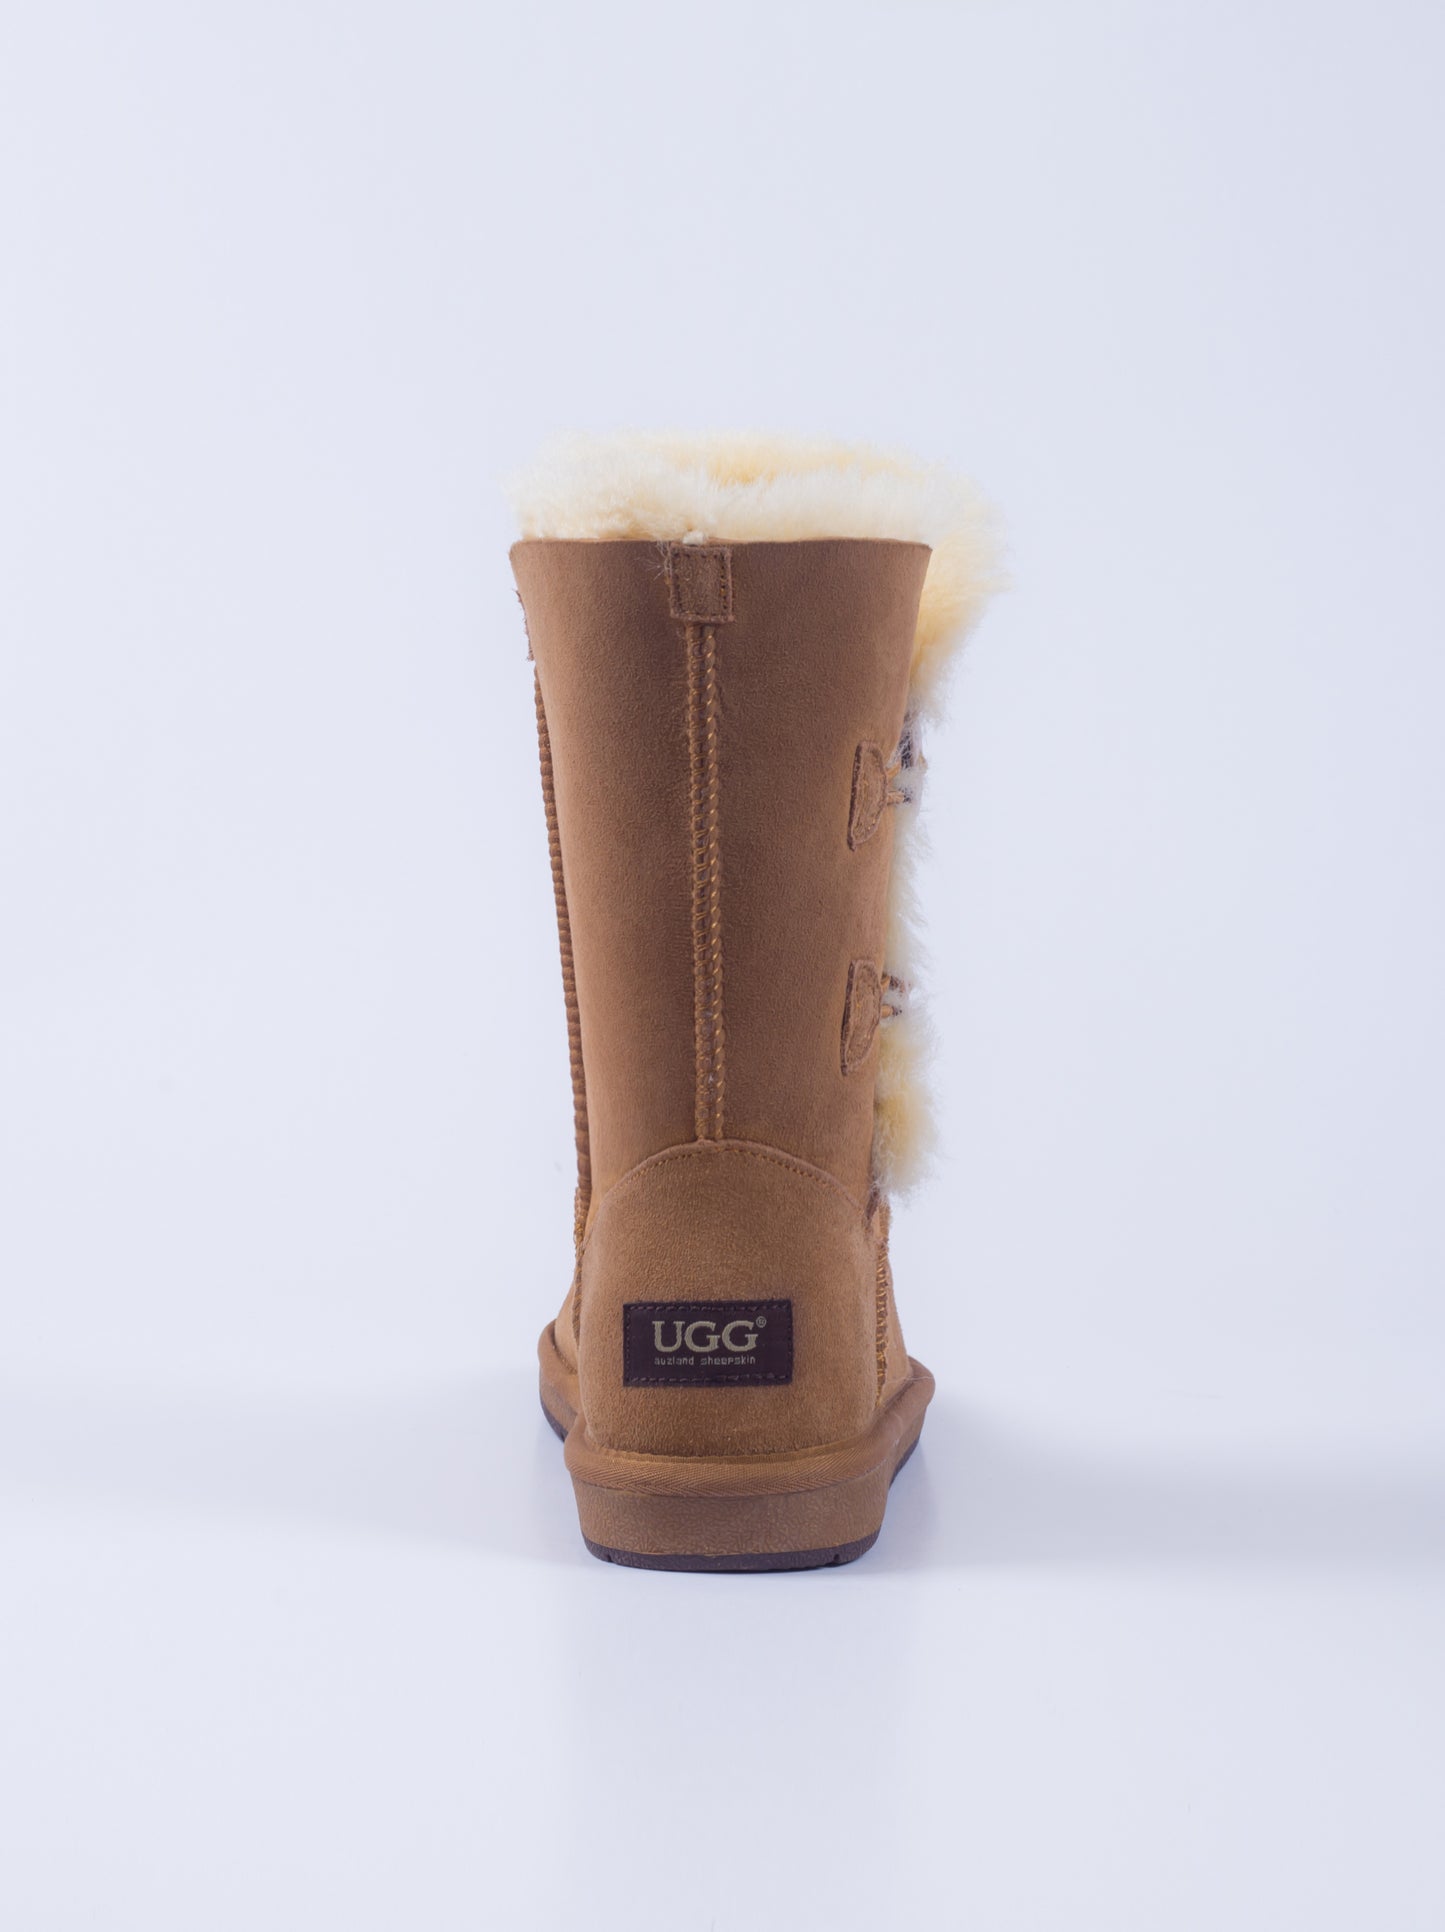 Classic 2 button Classic women's ugg boots